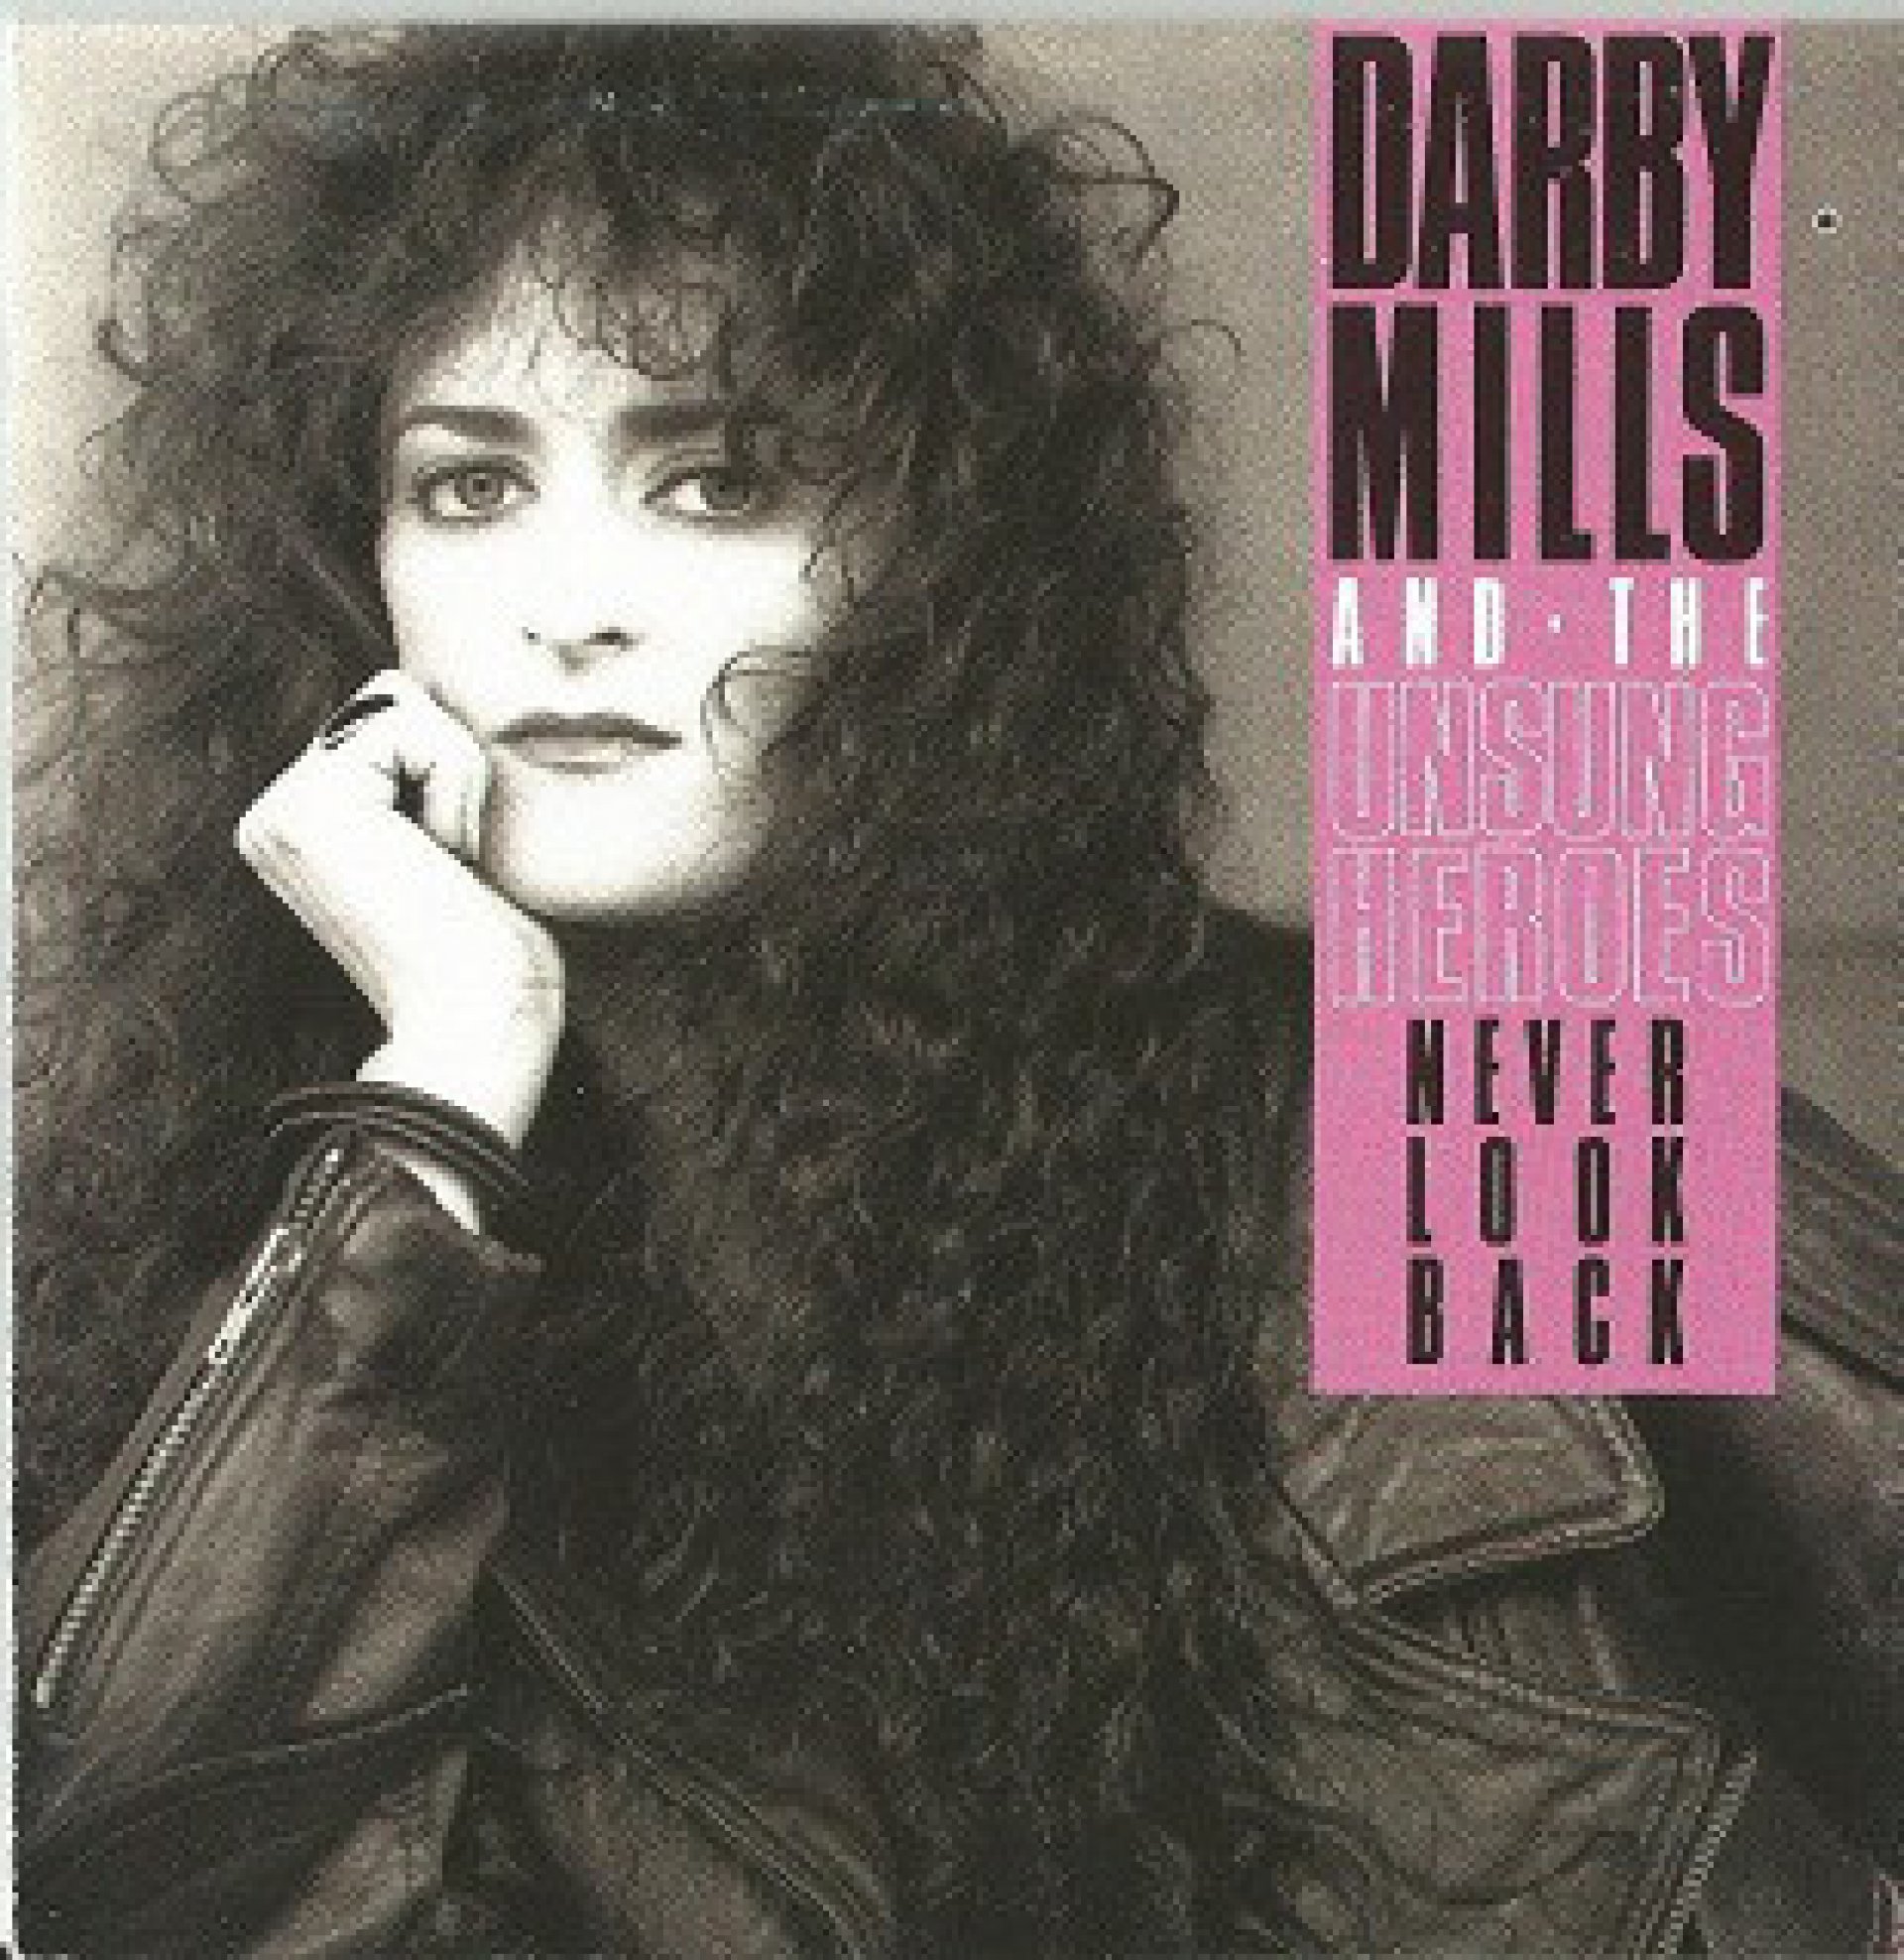 Darby Mills Never Look Back